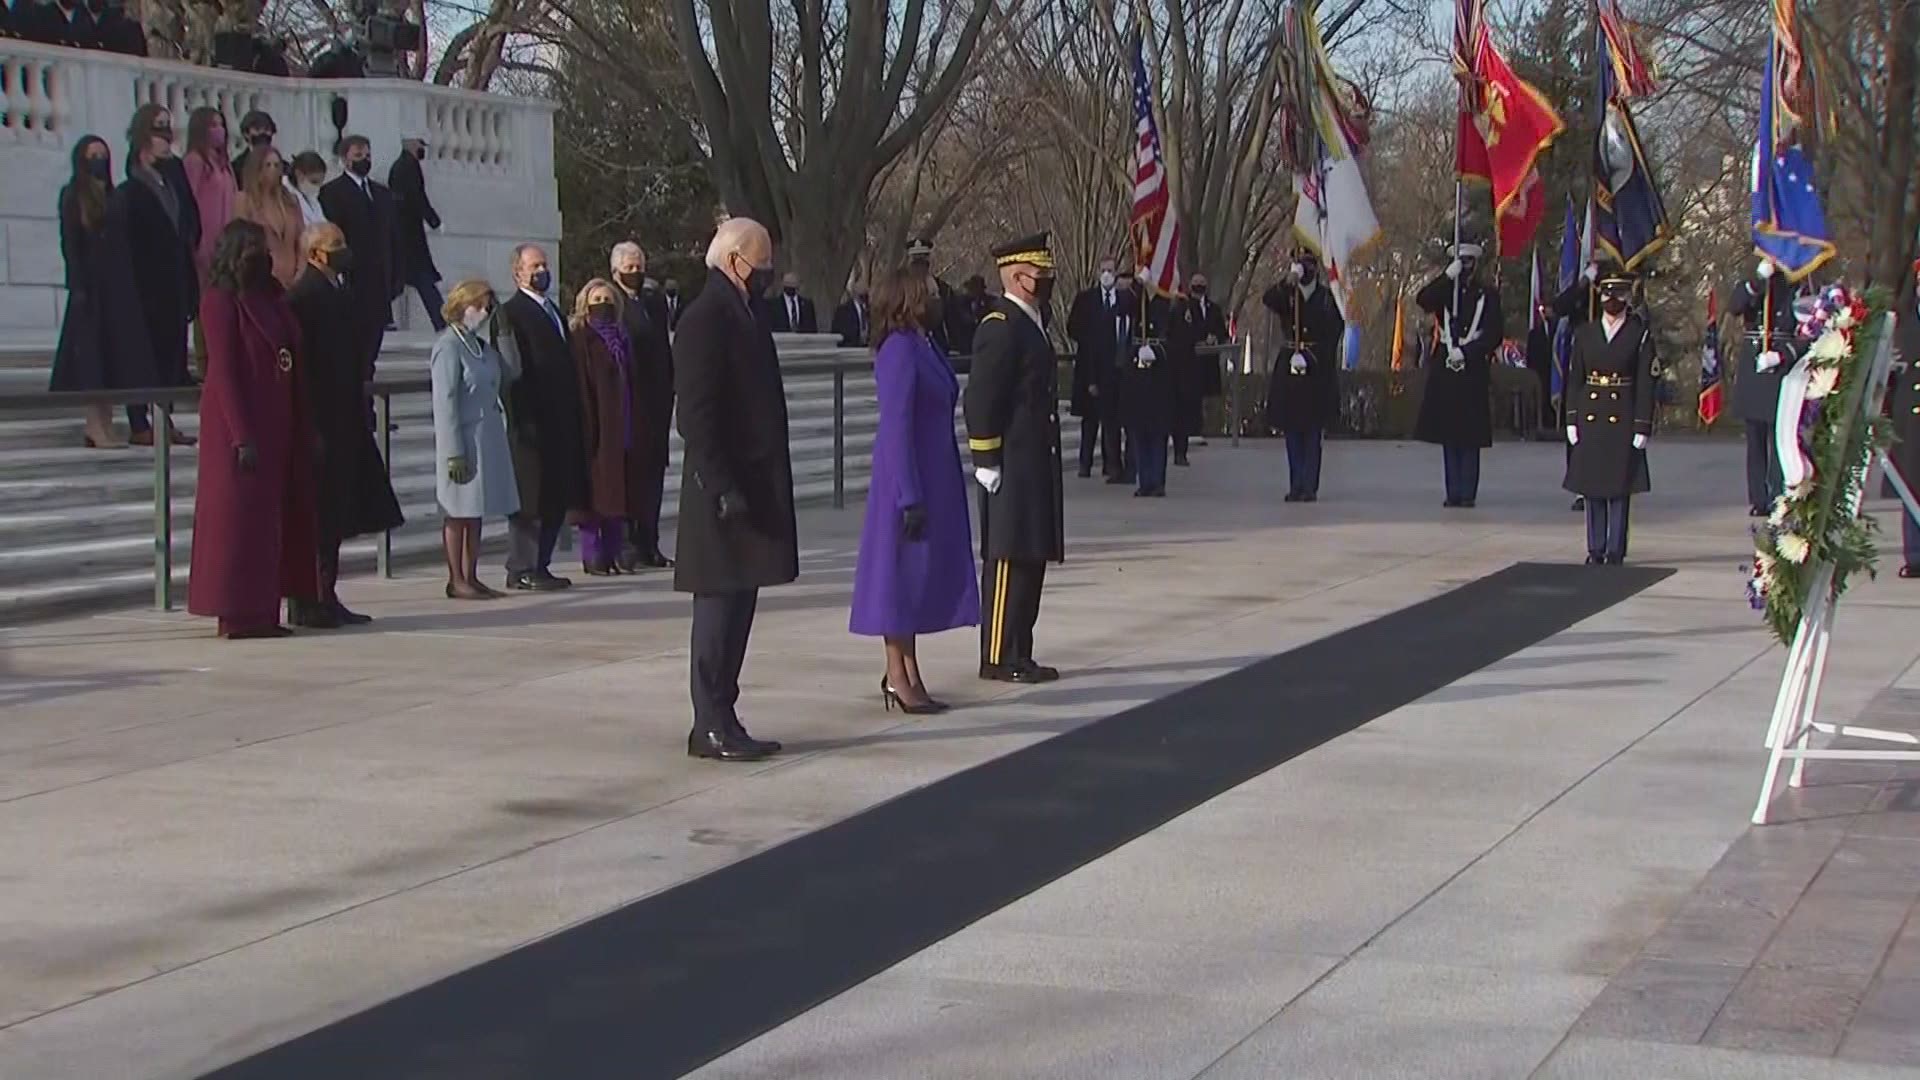 President Biden and Vice President Harris lay a wreath at the Tomb of the Unknown Soldier.